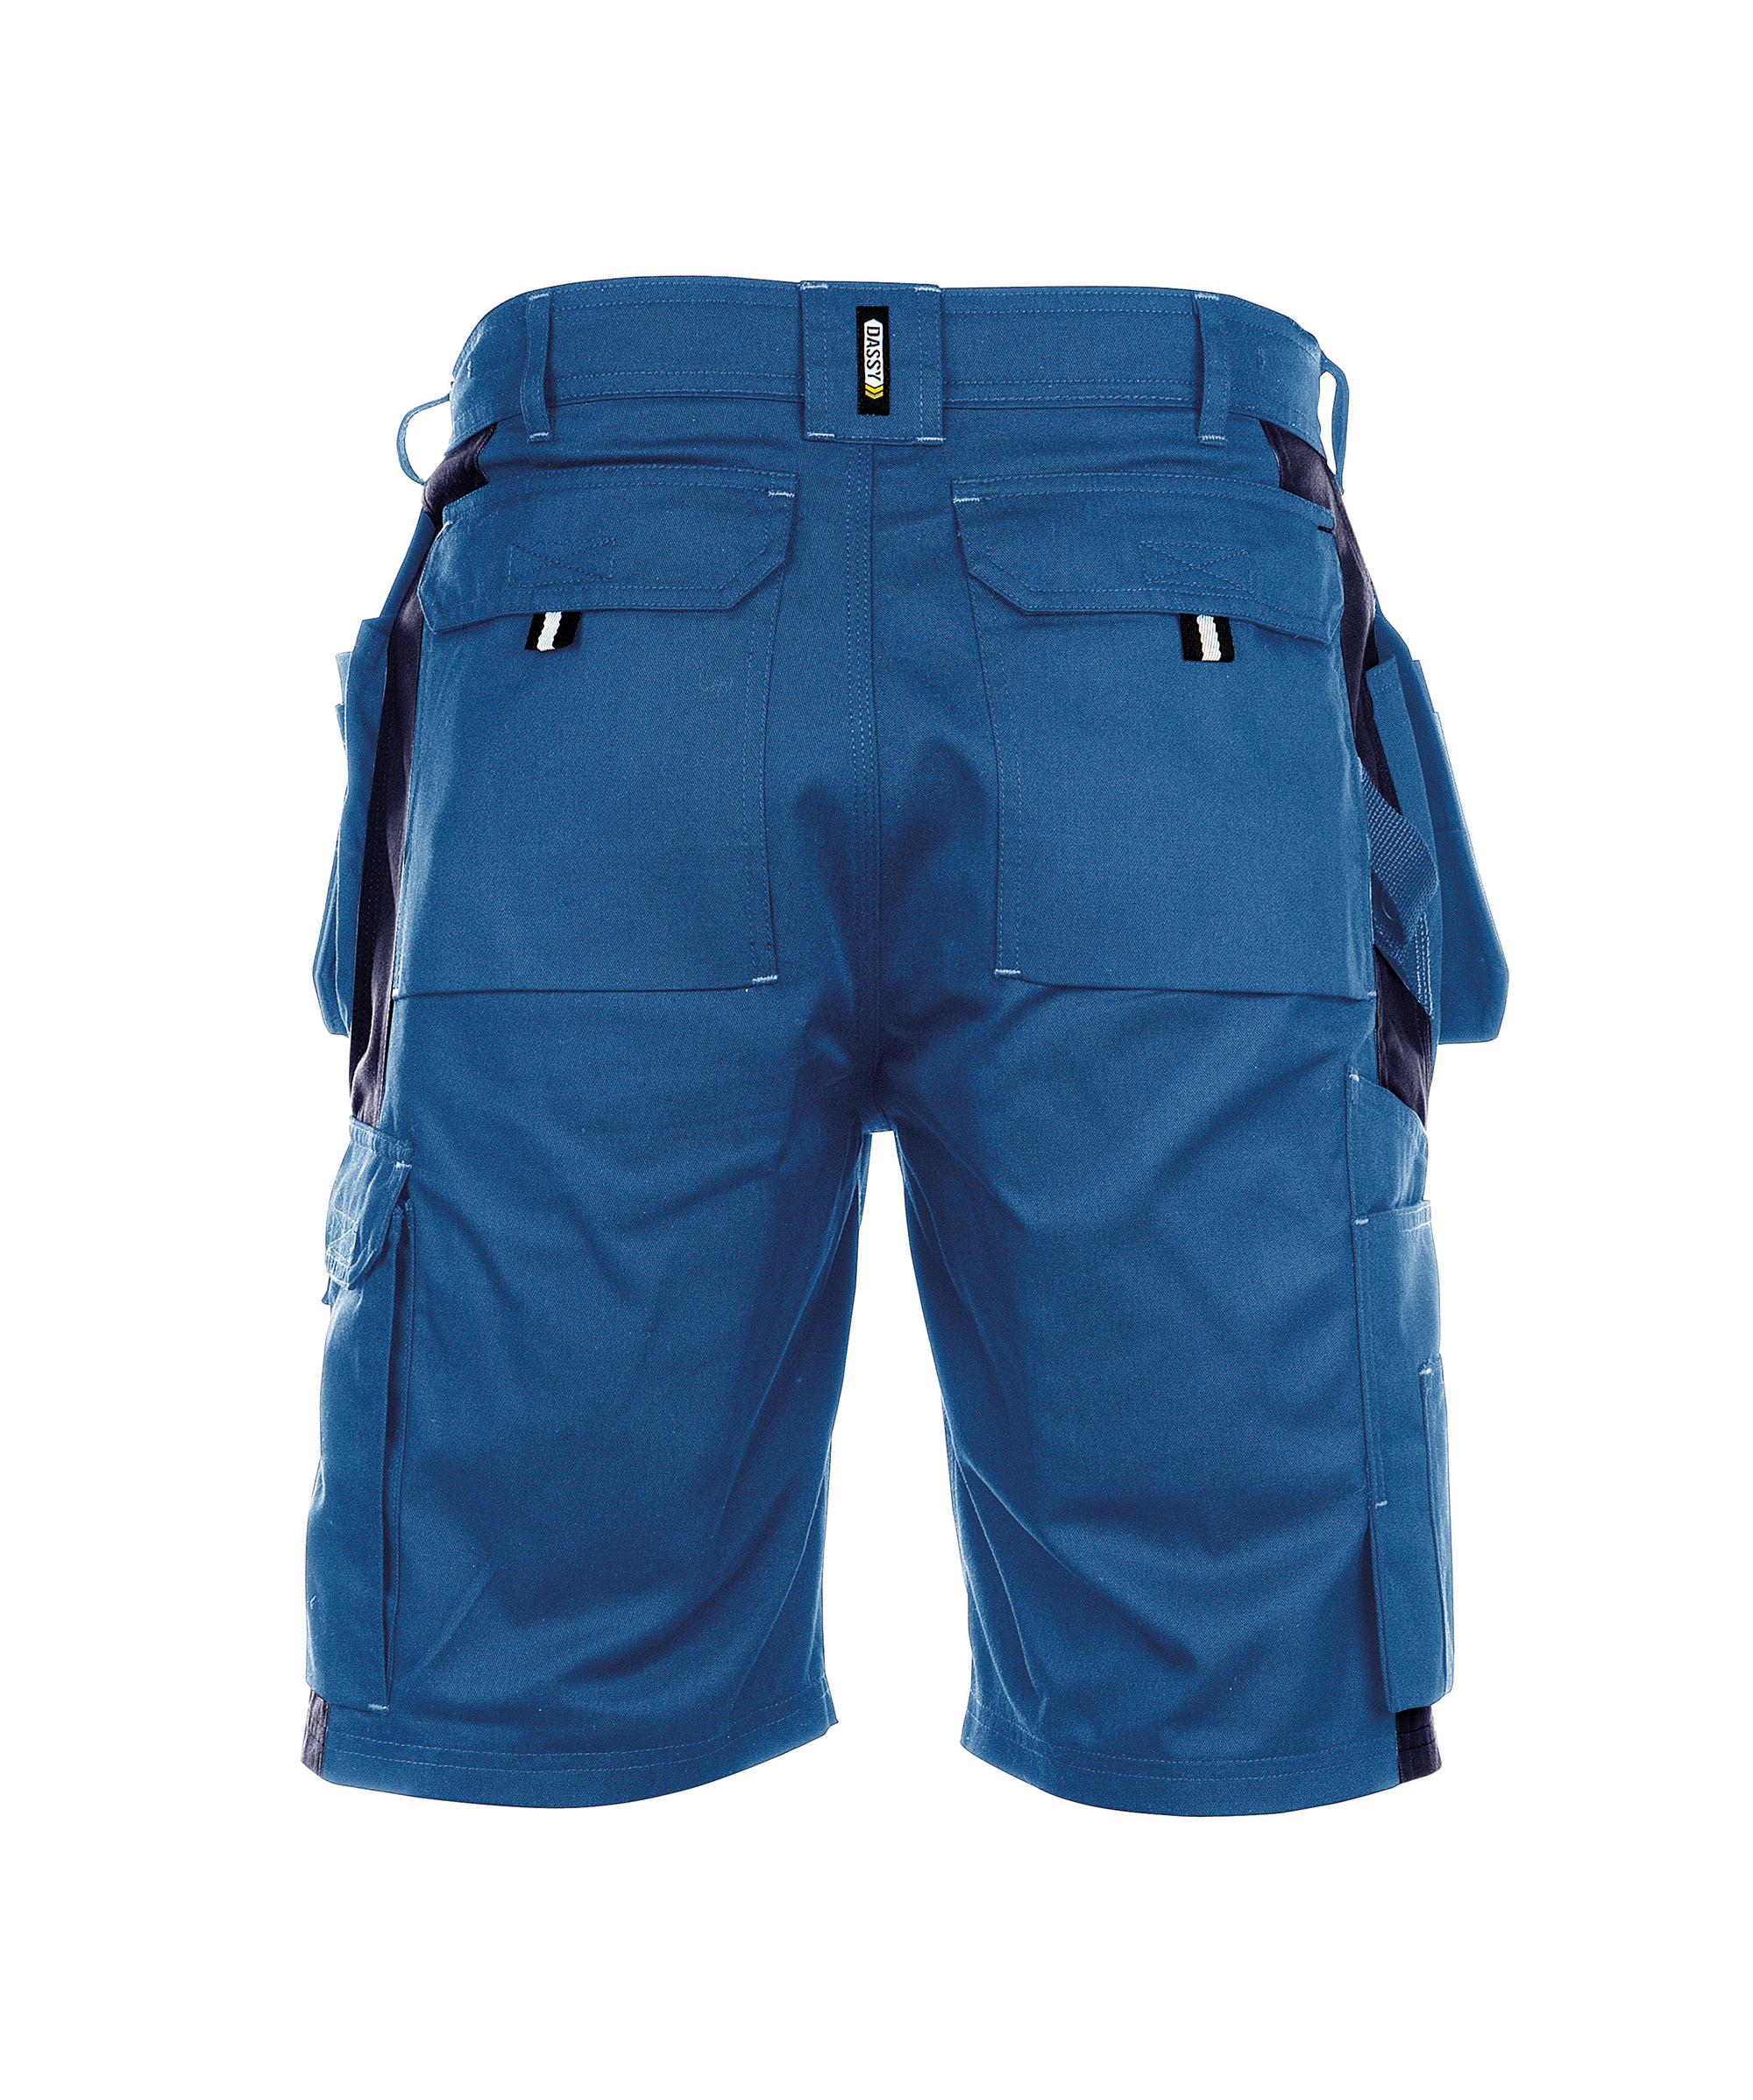 monza_two-tone-work-shorts-with-multi-pockets_royal-blue-navy_back.jpg